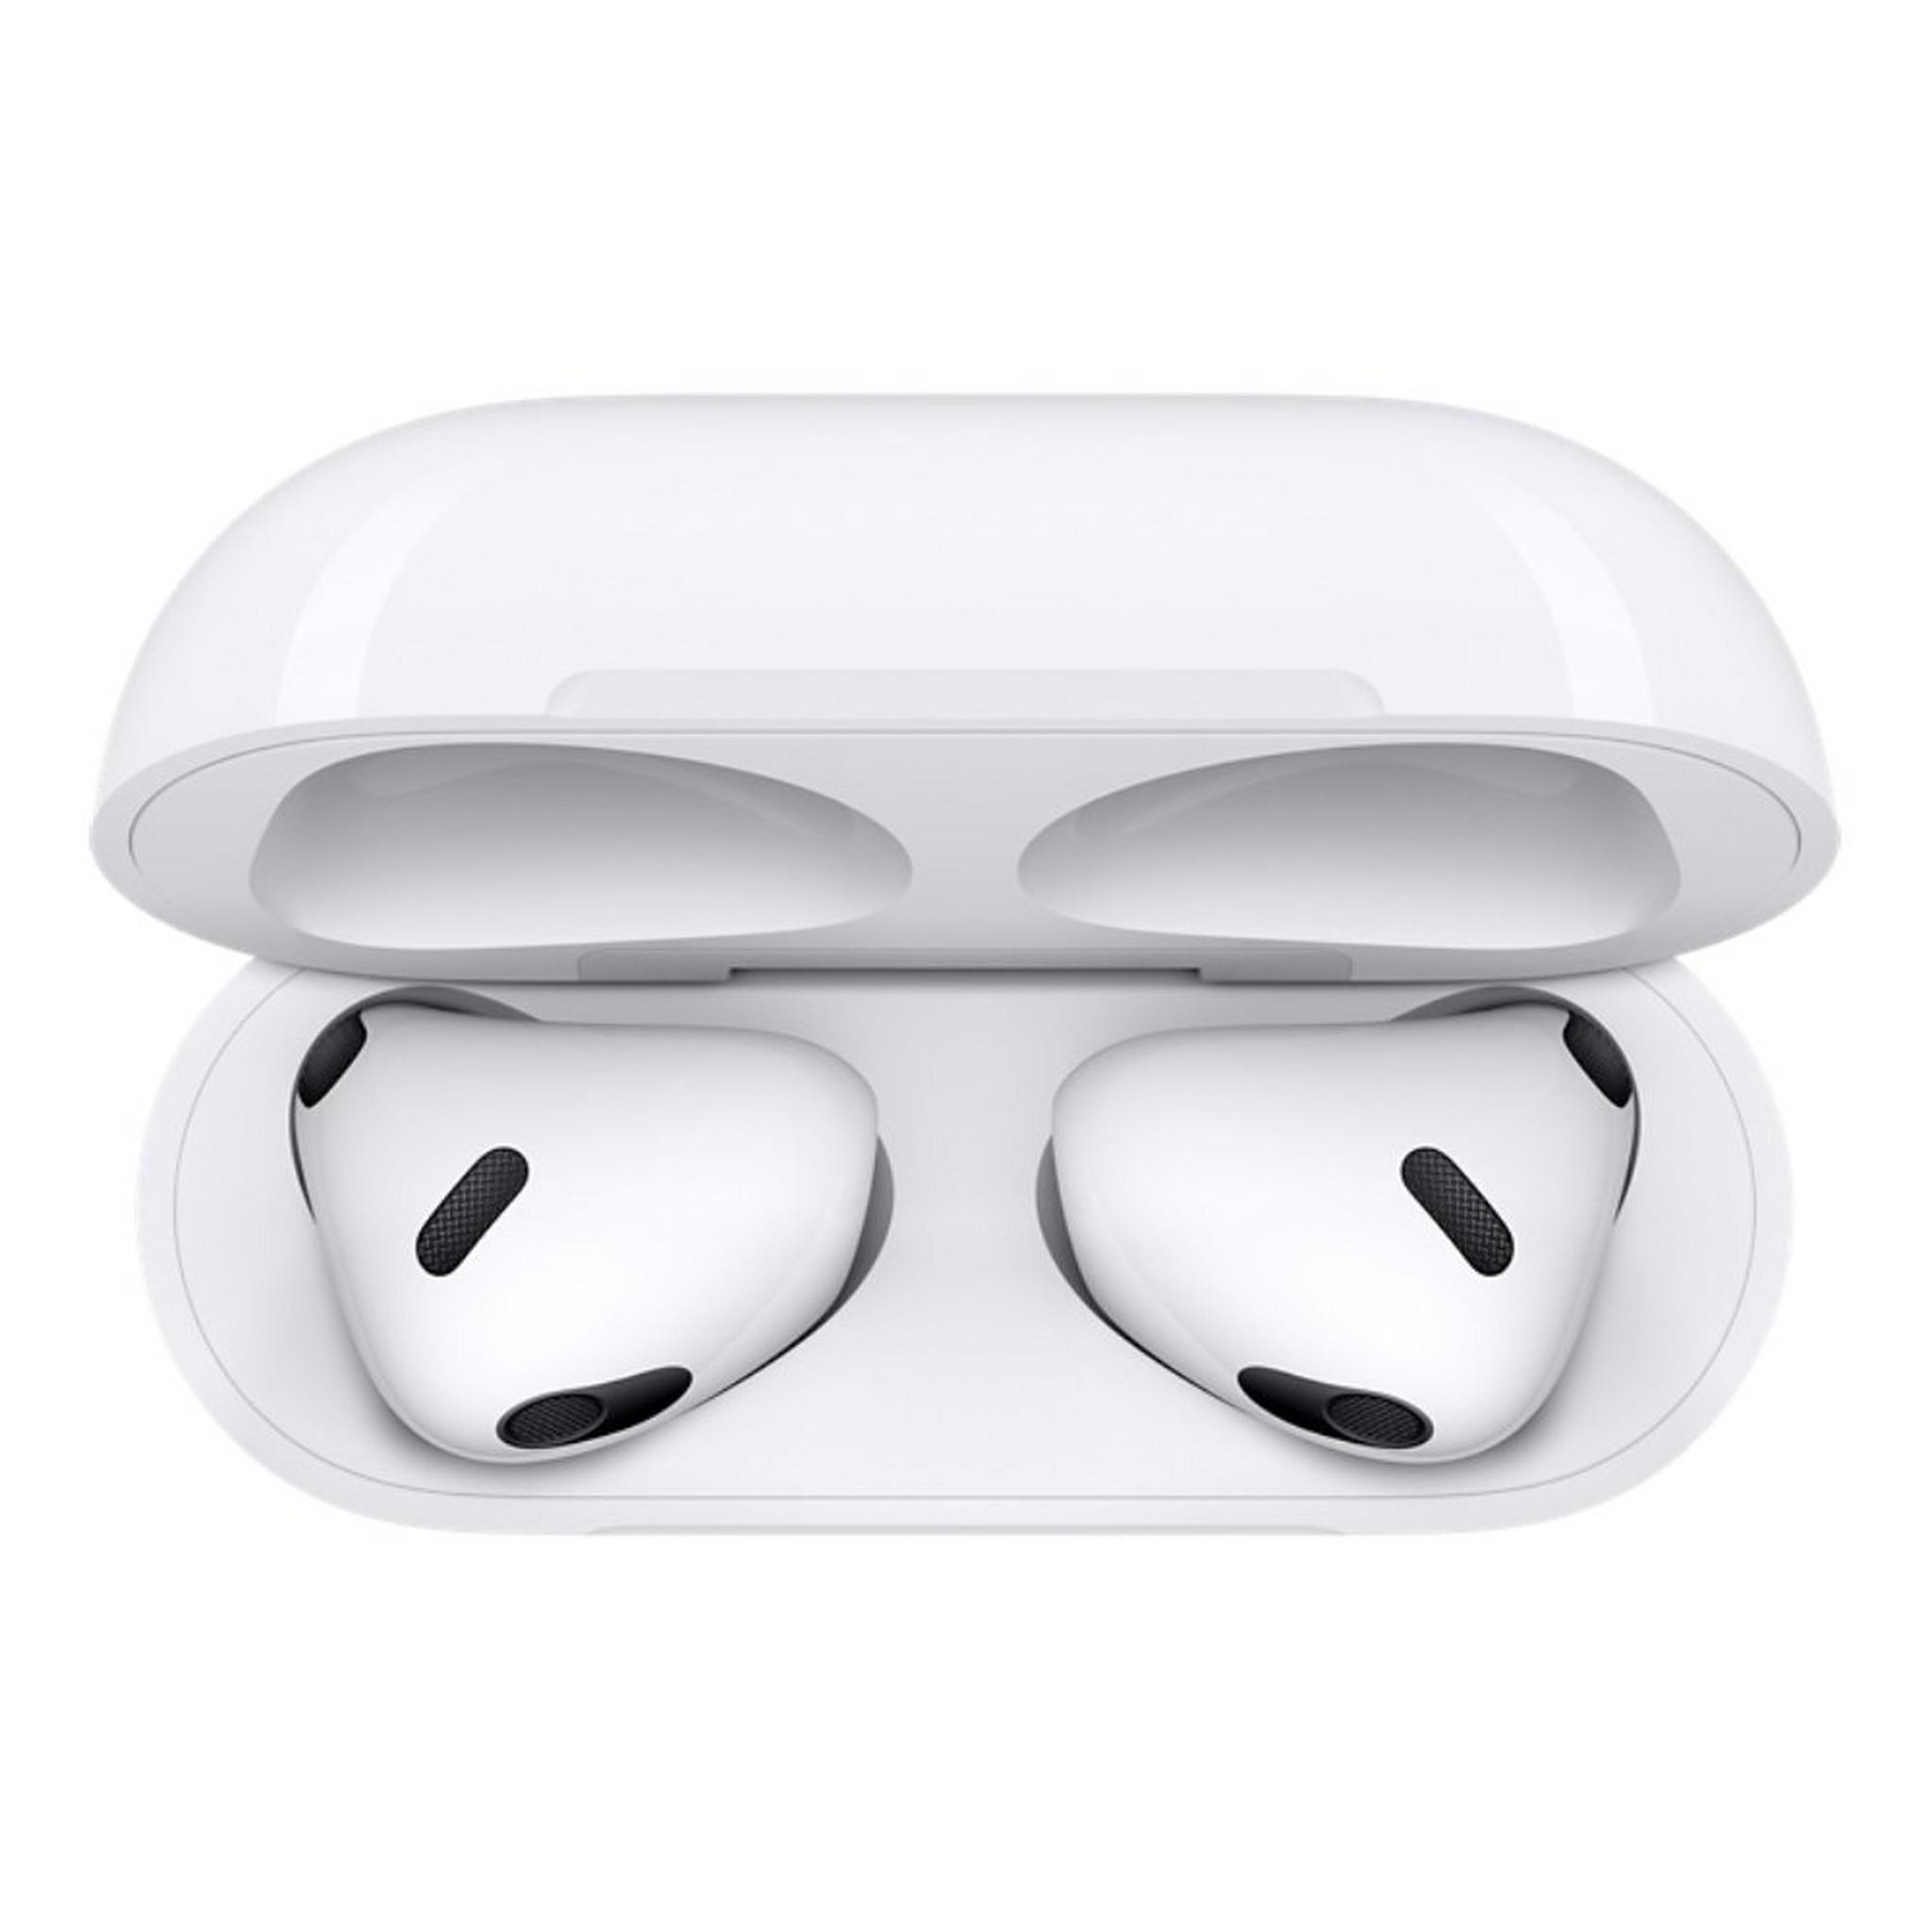 Apple Airpods 3 Lightning Charging Case